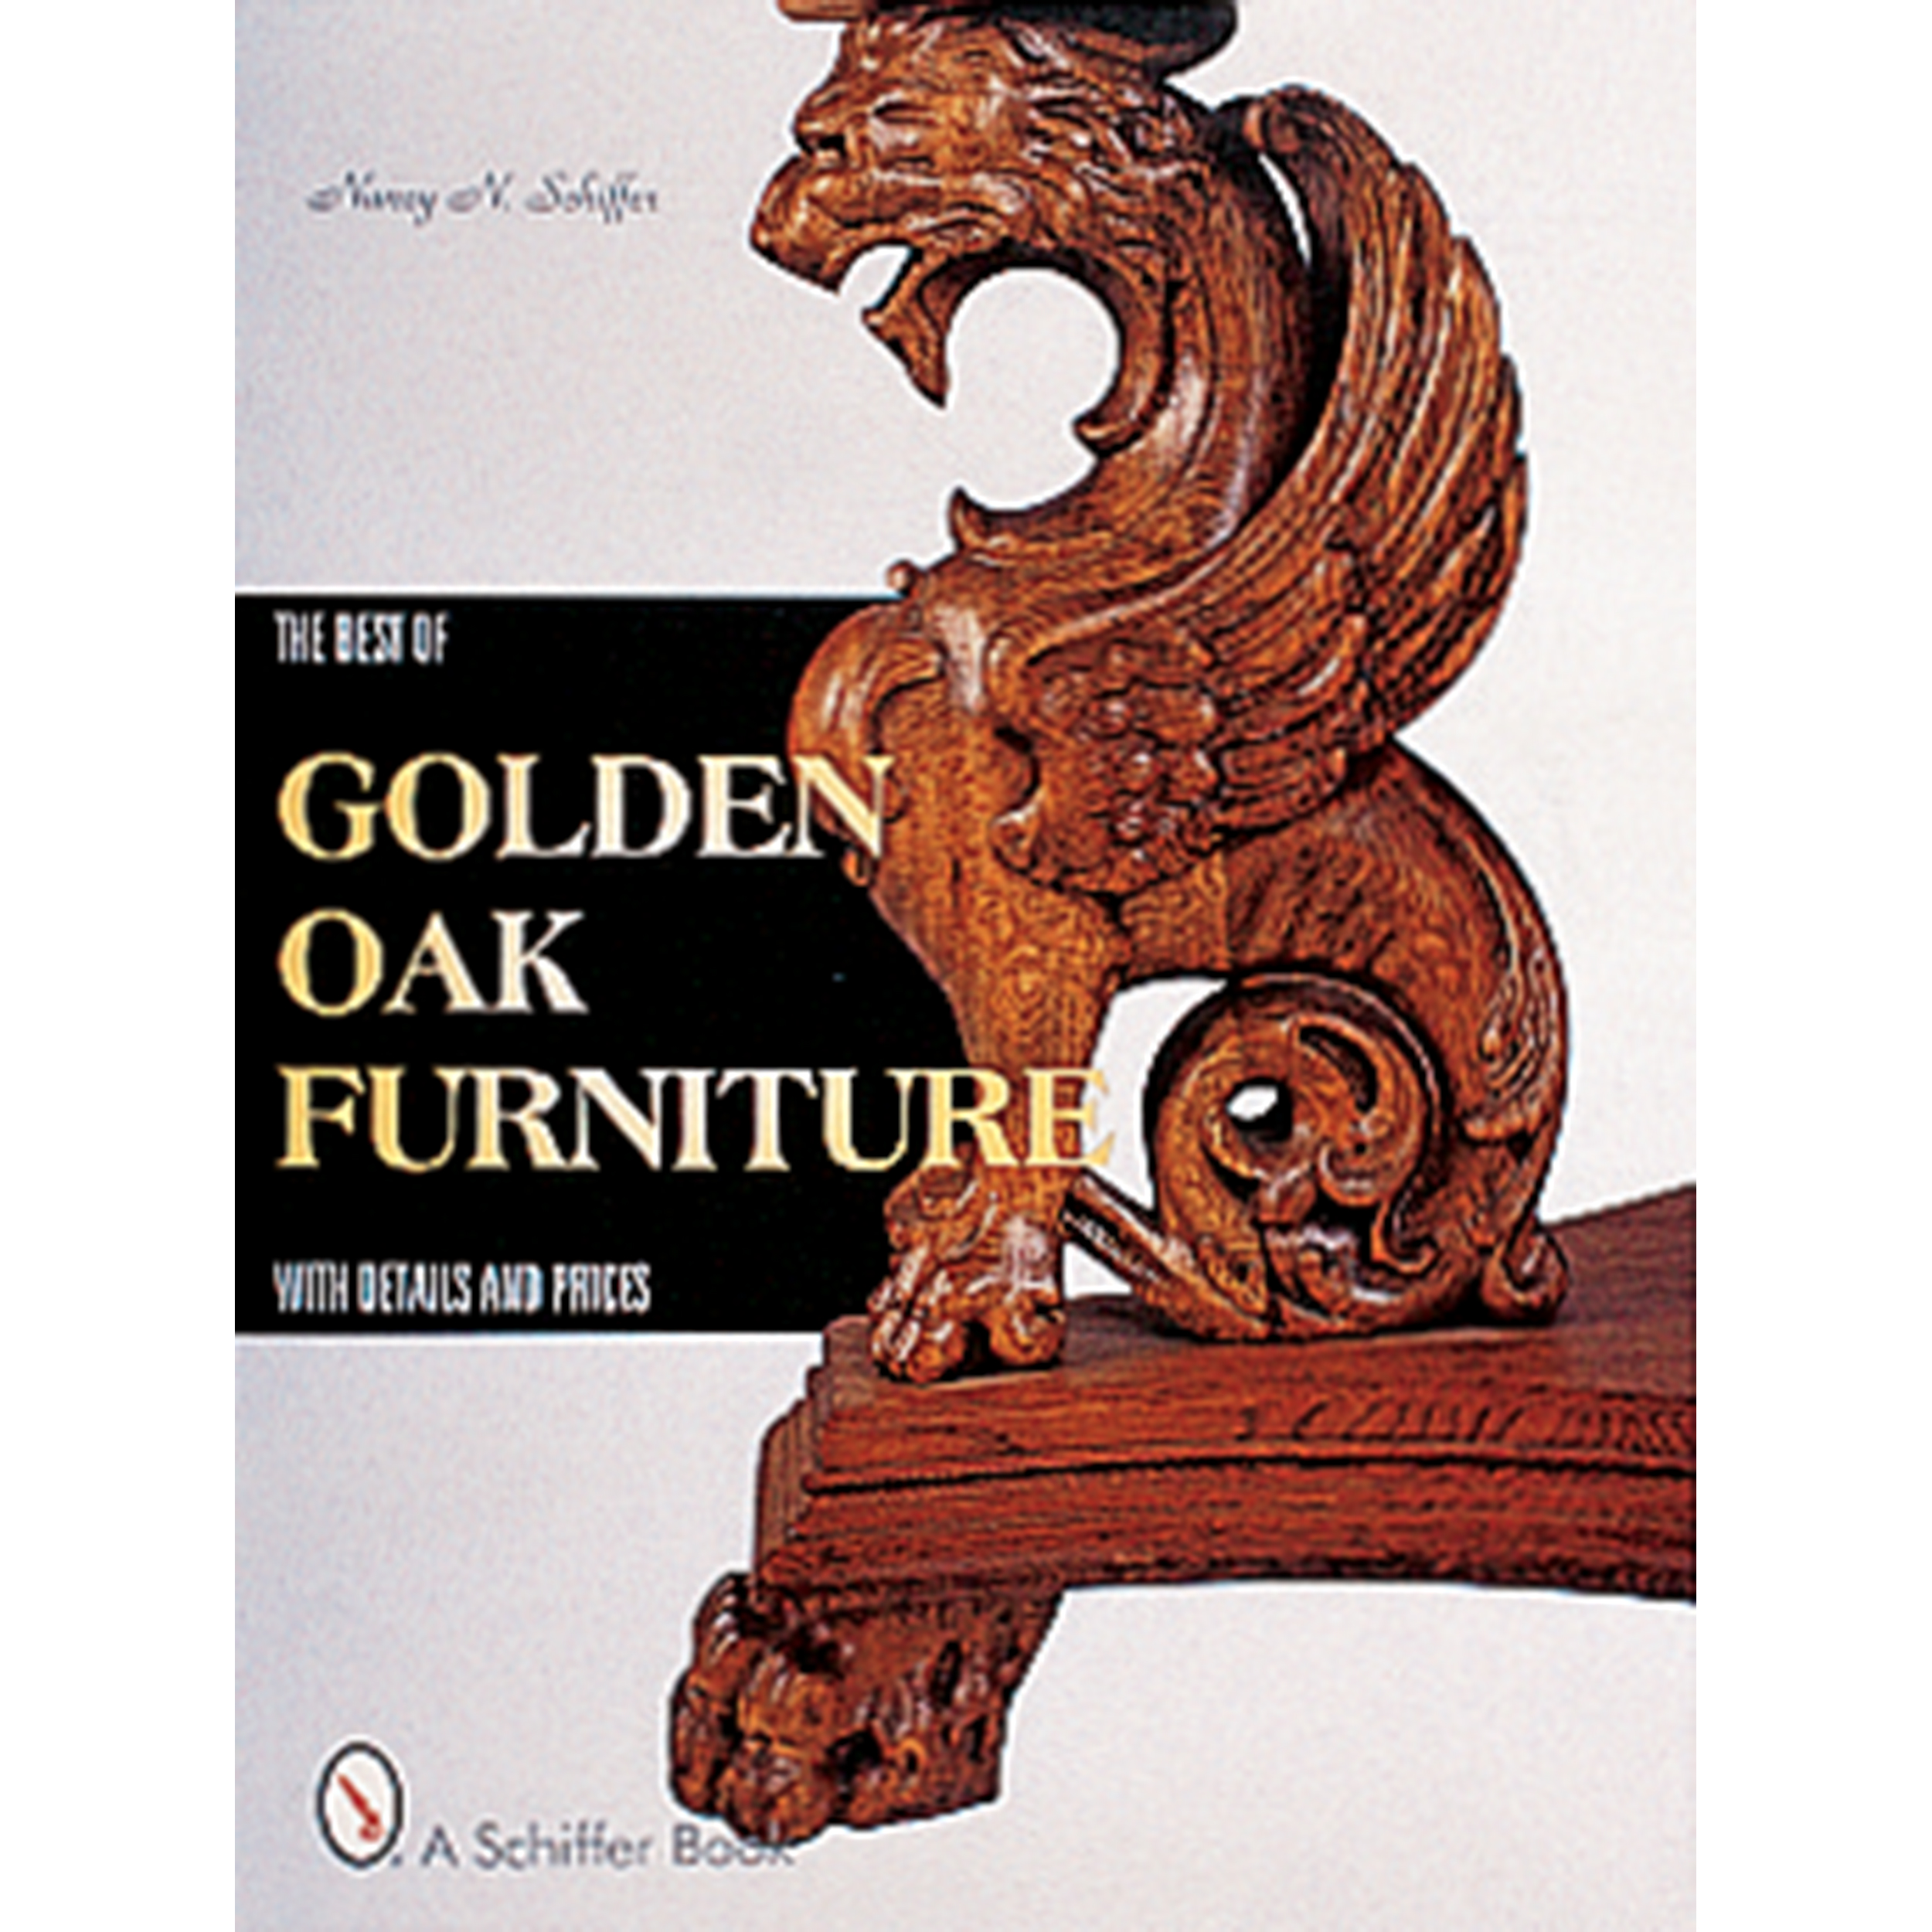 The Best Of Golden Oak Furniture, With Details And Prices